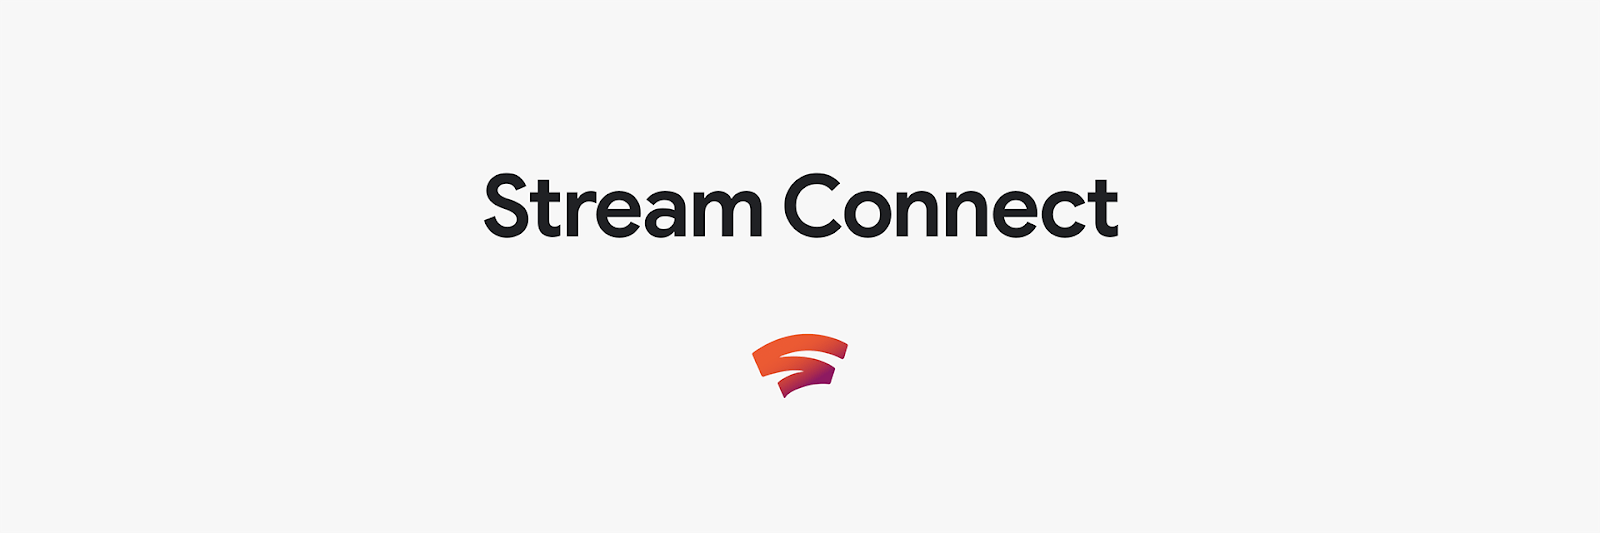 Gameplay Logo - Stream Connect: New Possibilities for Multiplayer Gameplay